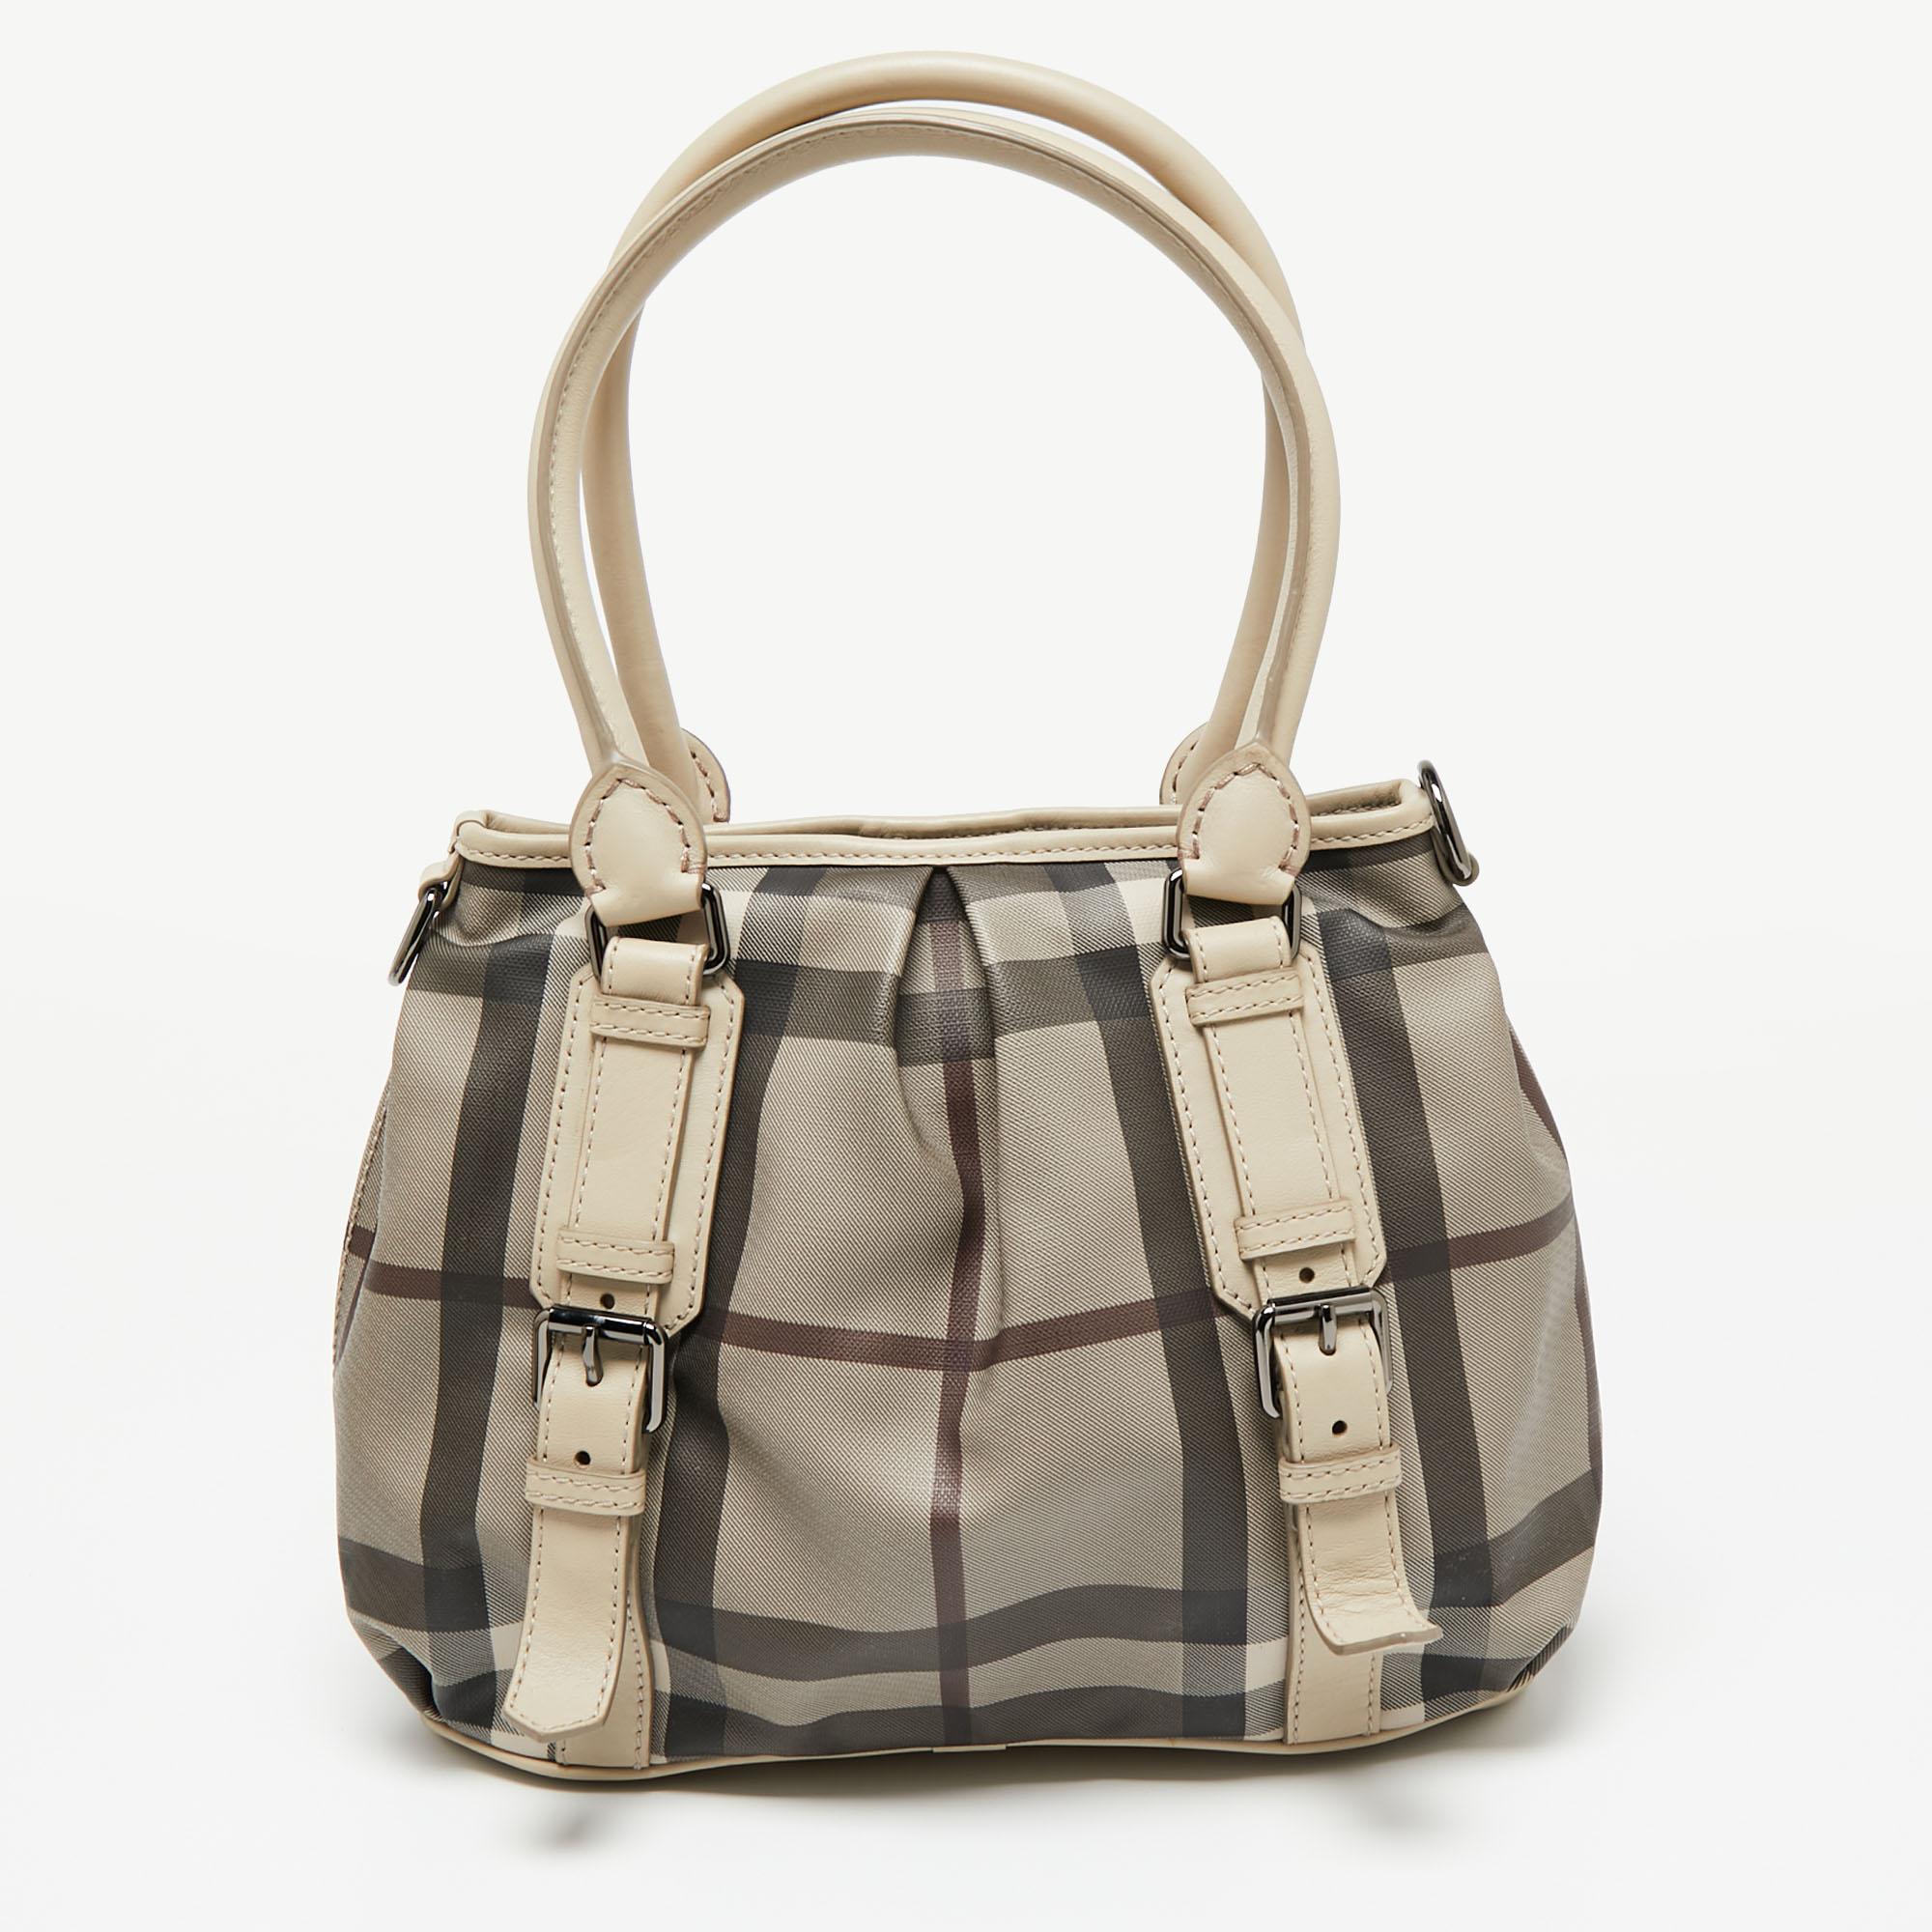 Charming and contemporary, this Northfield tote is from Burberry. It is created from the Check PVC and flaunts two rolled handles, a detachable shoulder strap, and a well-sized canvas interior. The beige exterior is also equipped with buckle